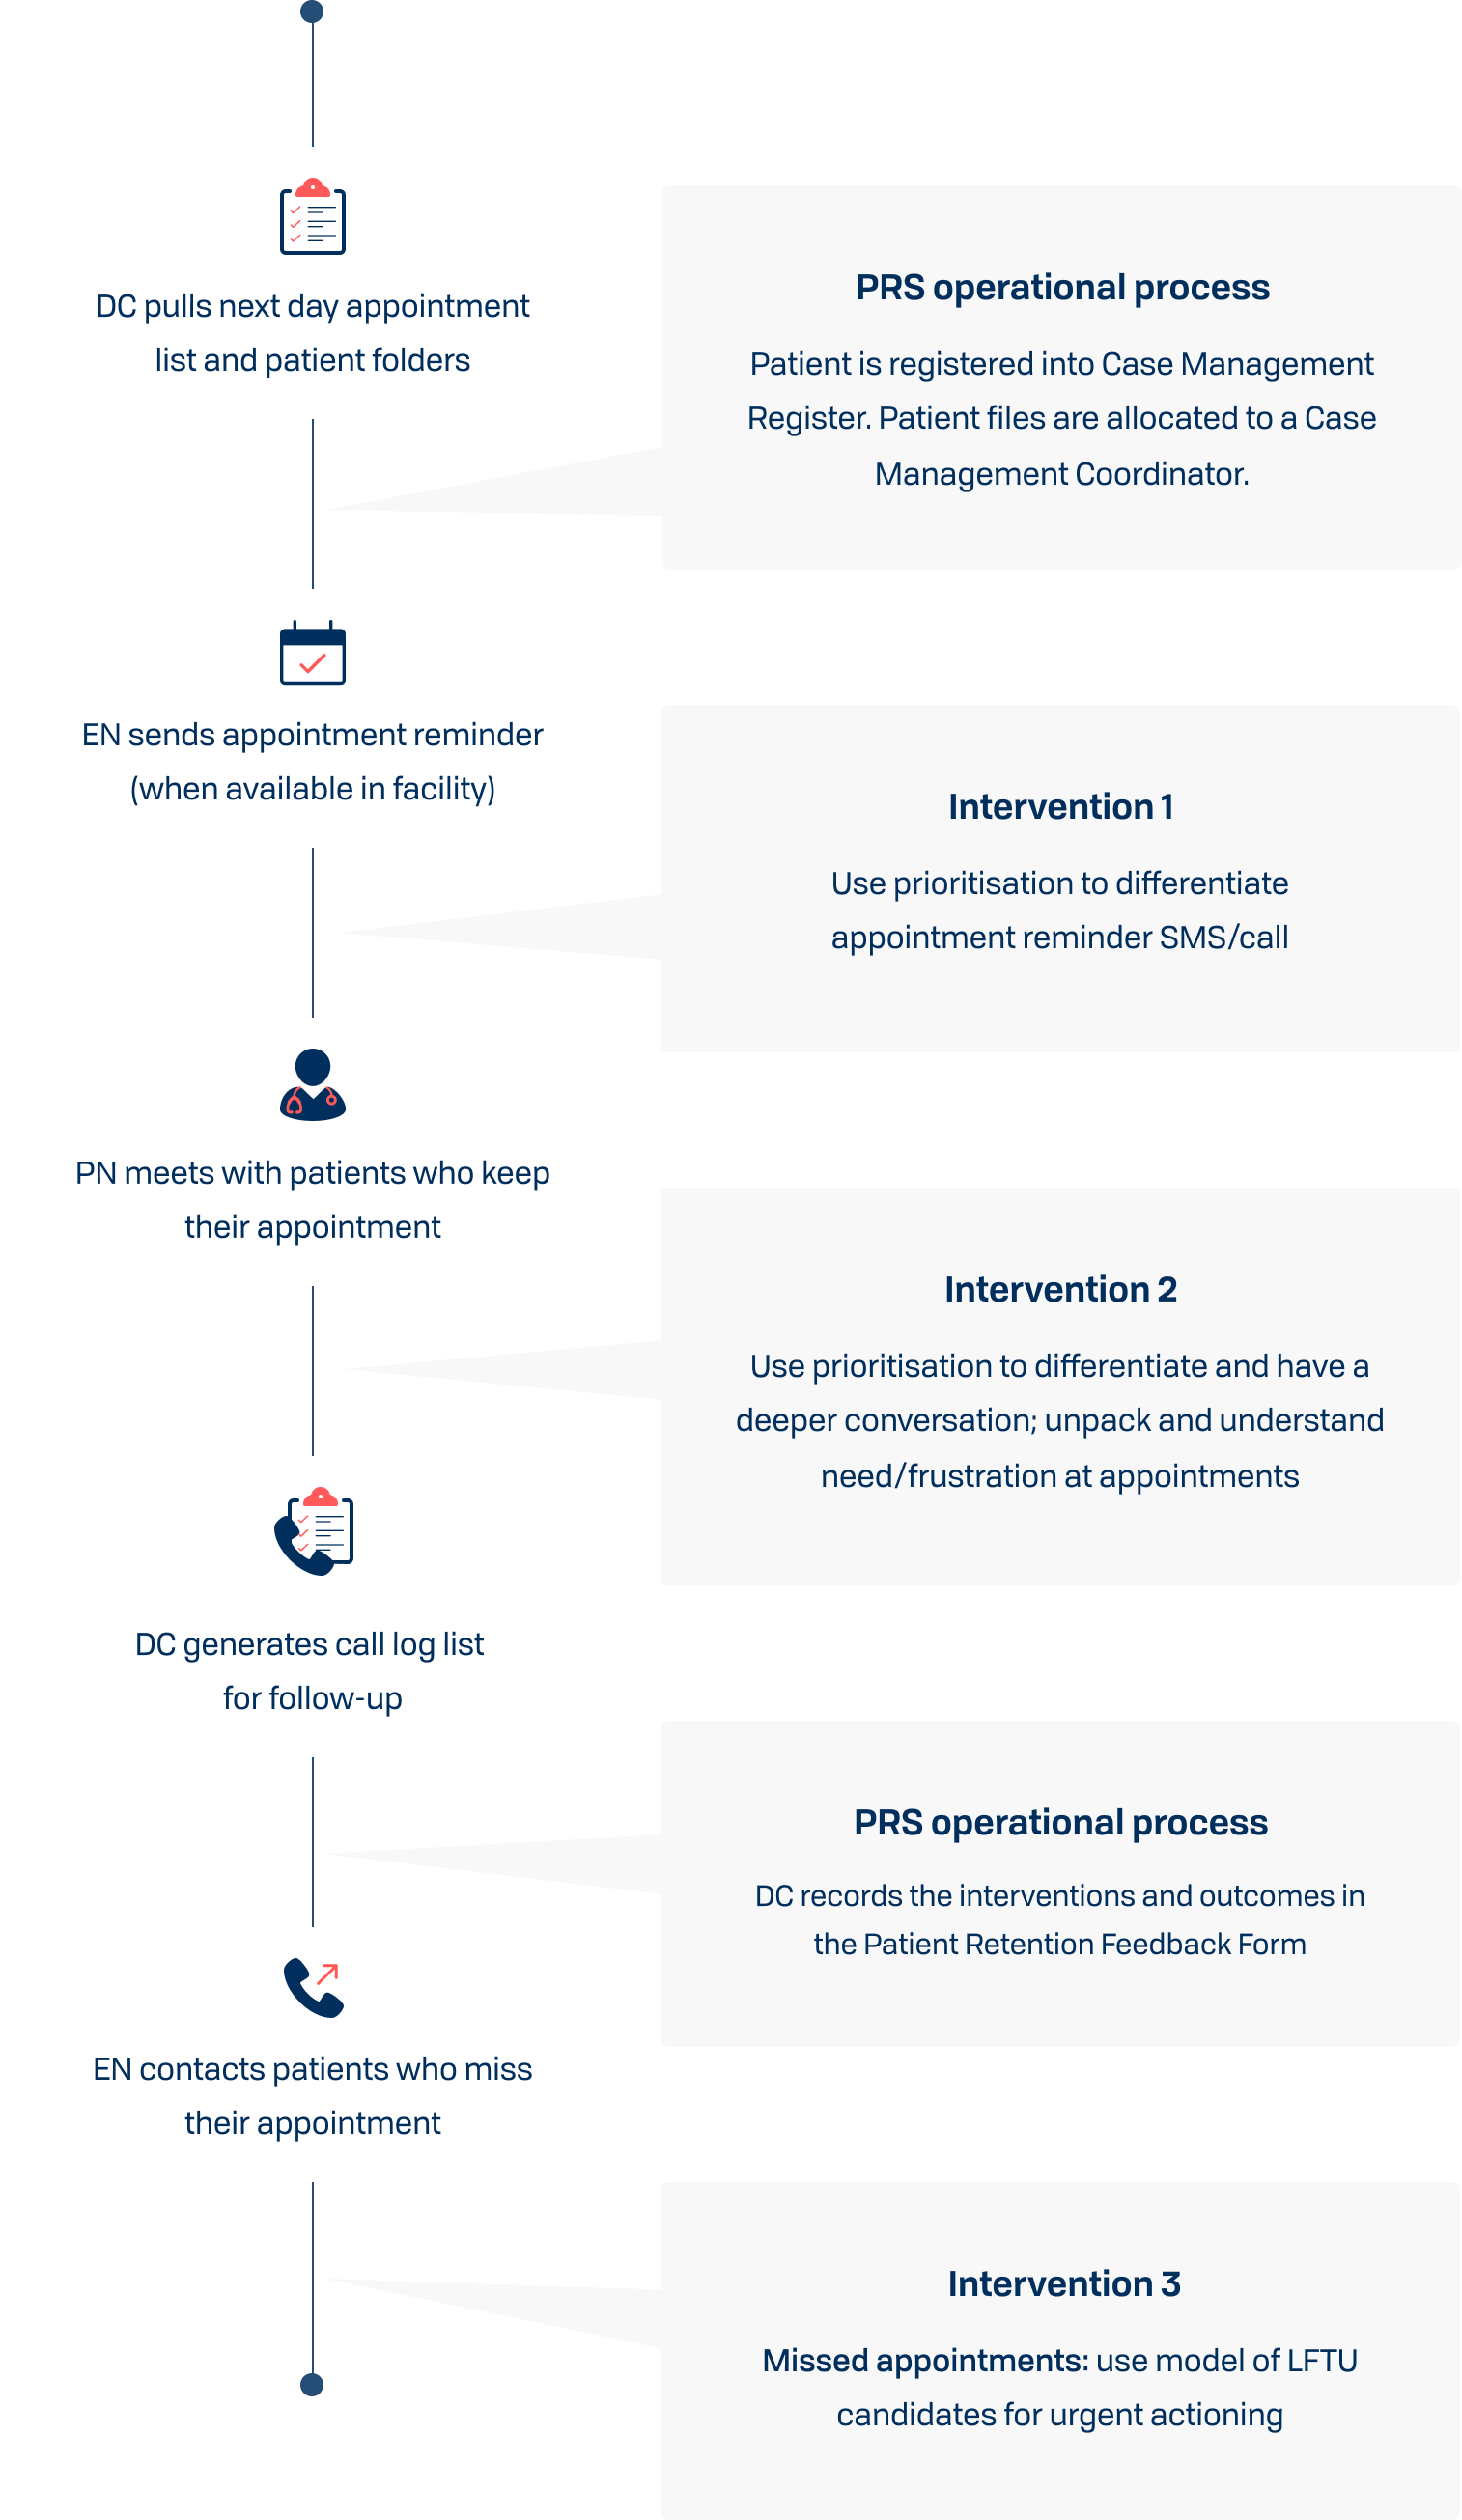 Implementation process applied to this use case